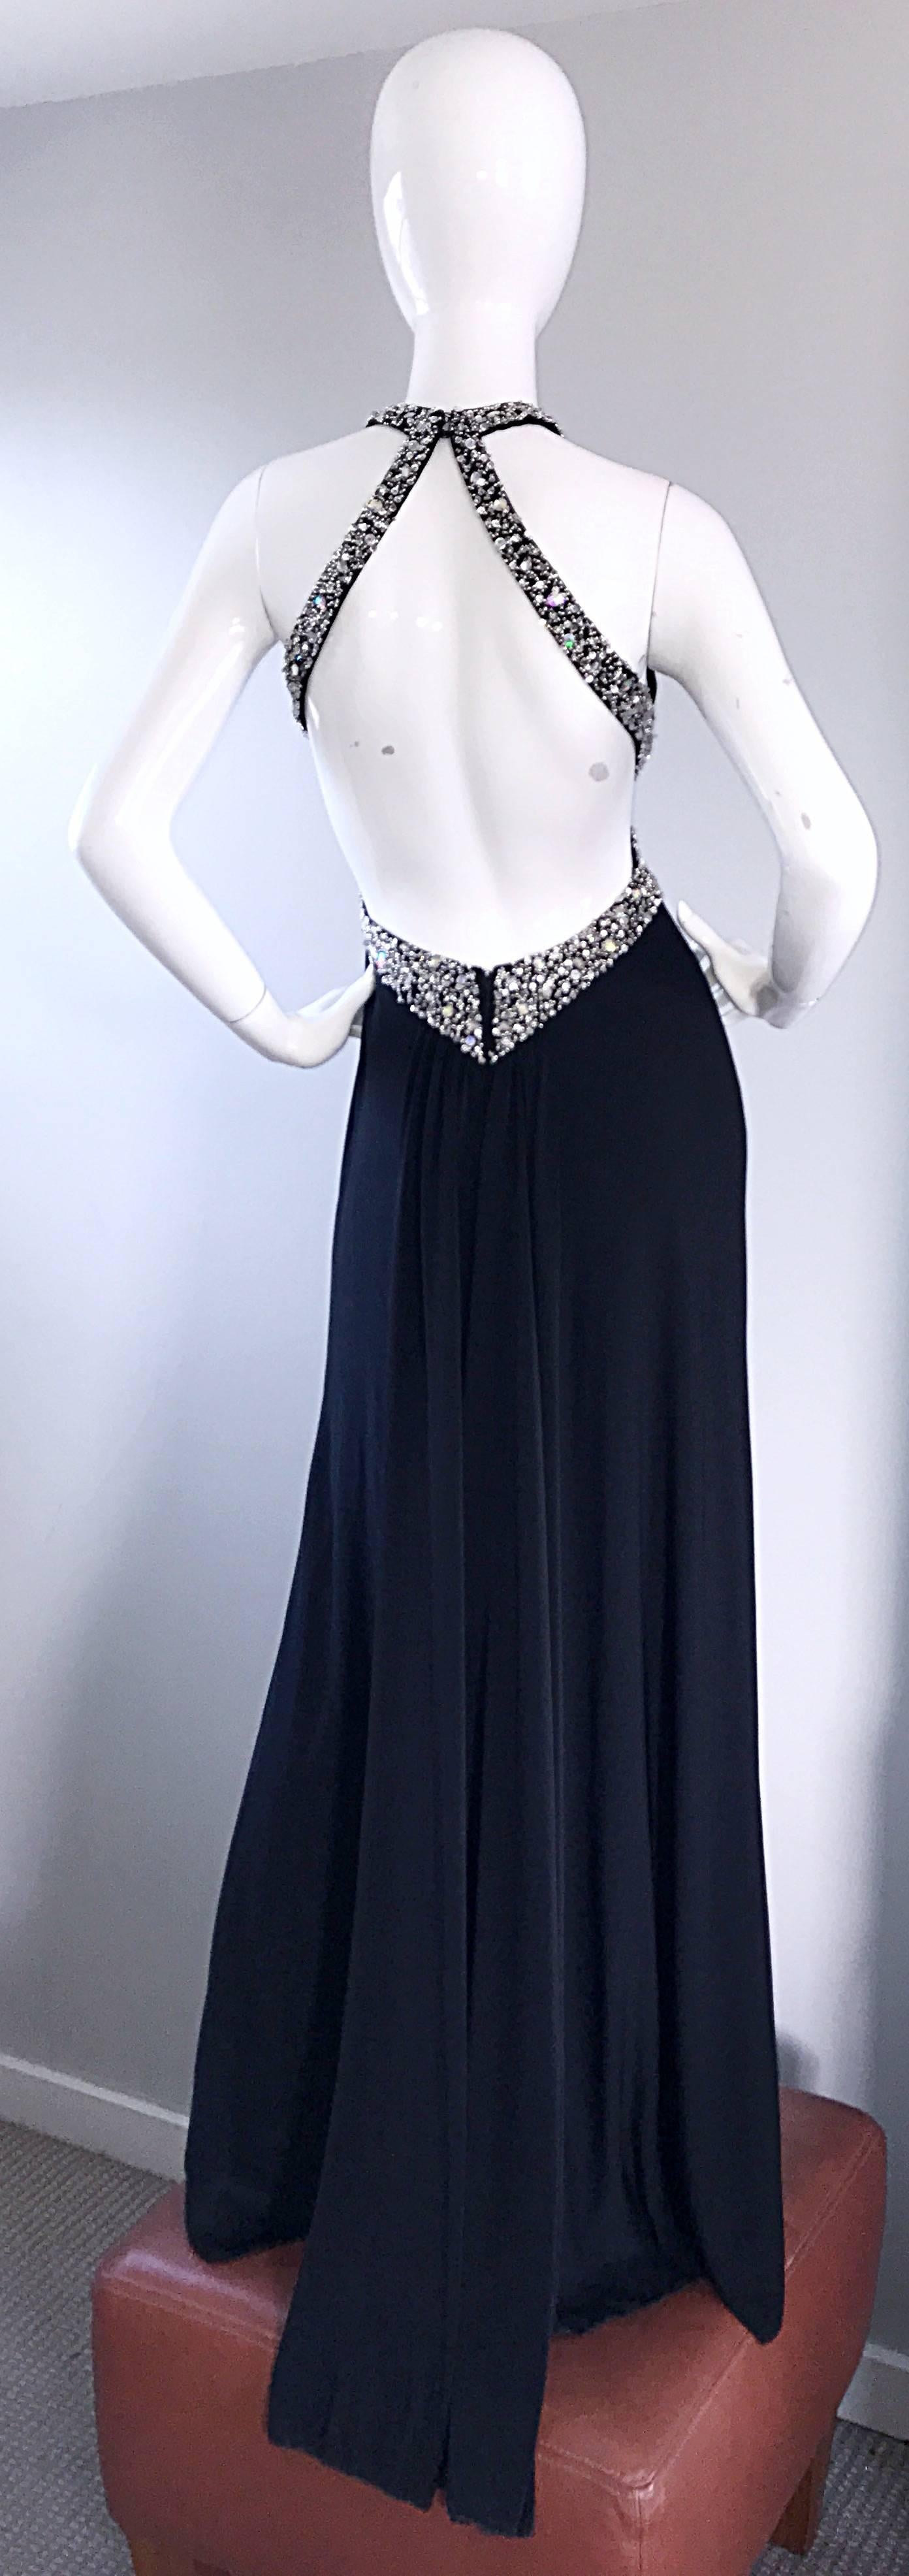 1990s Sexy Custom Made Black Jersey Crystal Beaded Cut Out Vintage Evening Gown For Sale 3